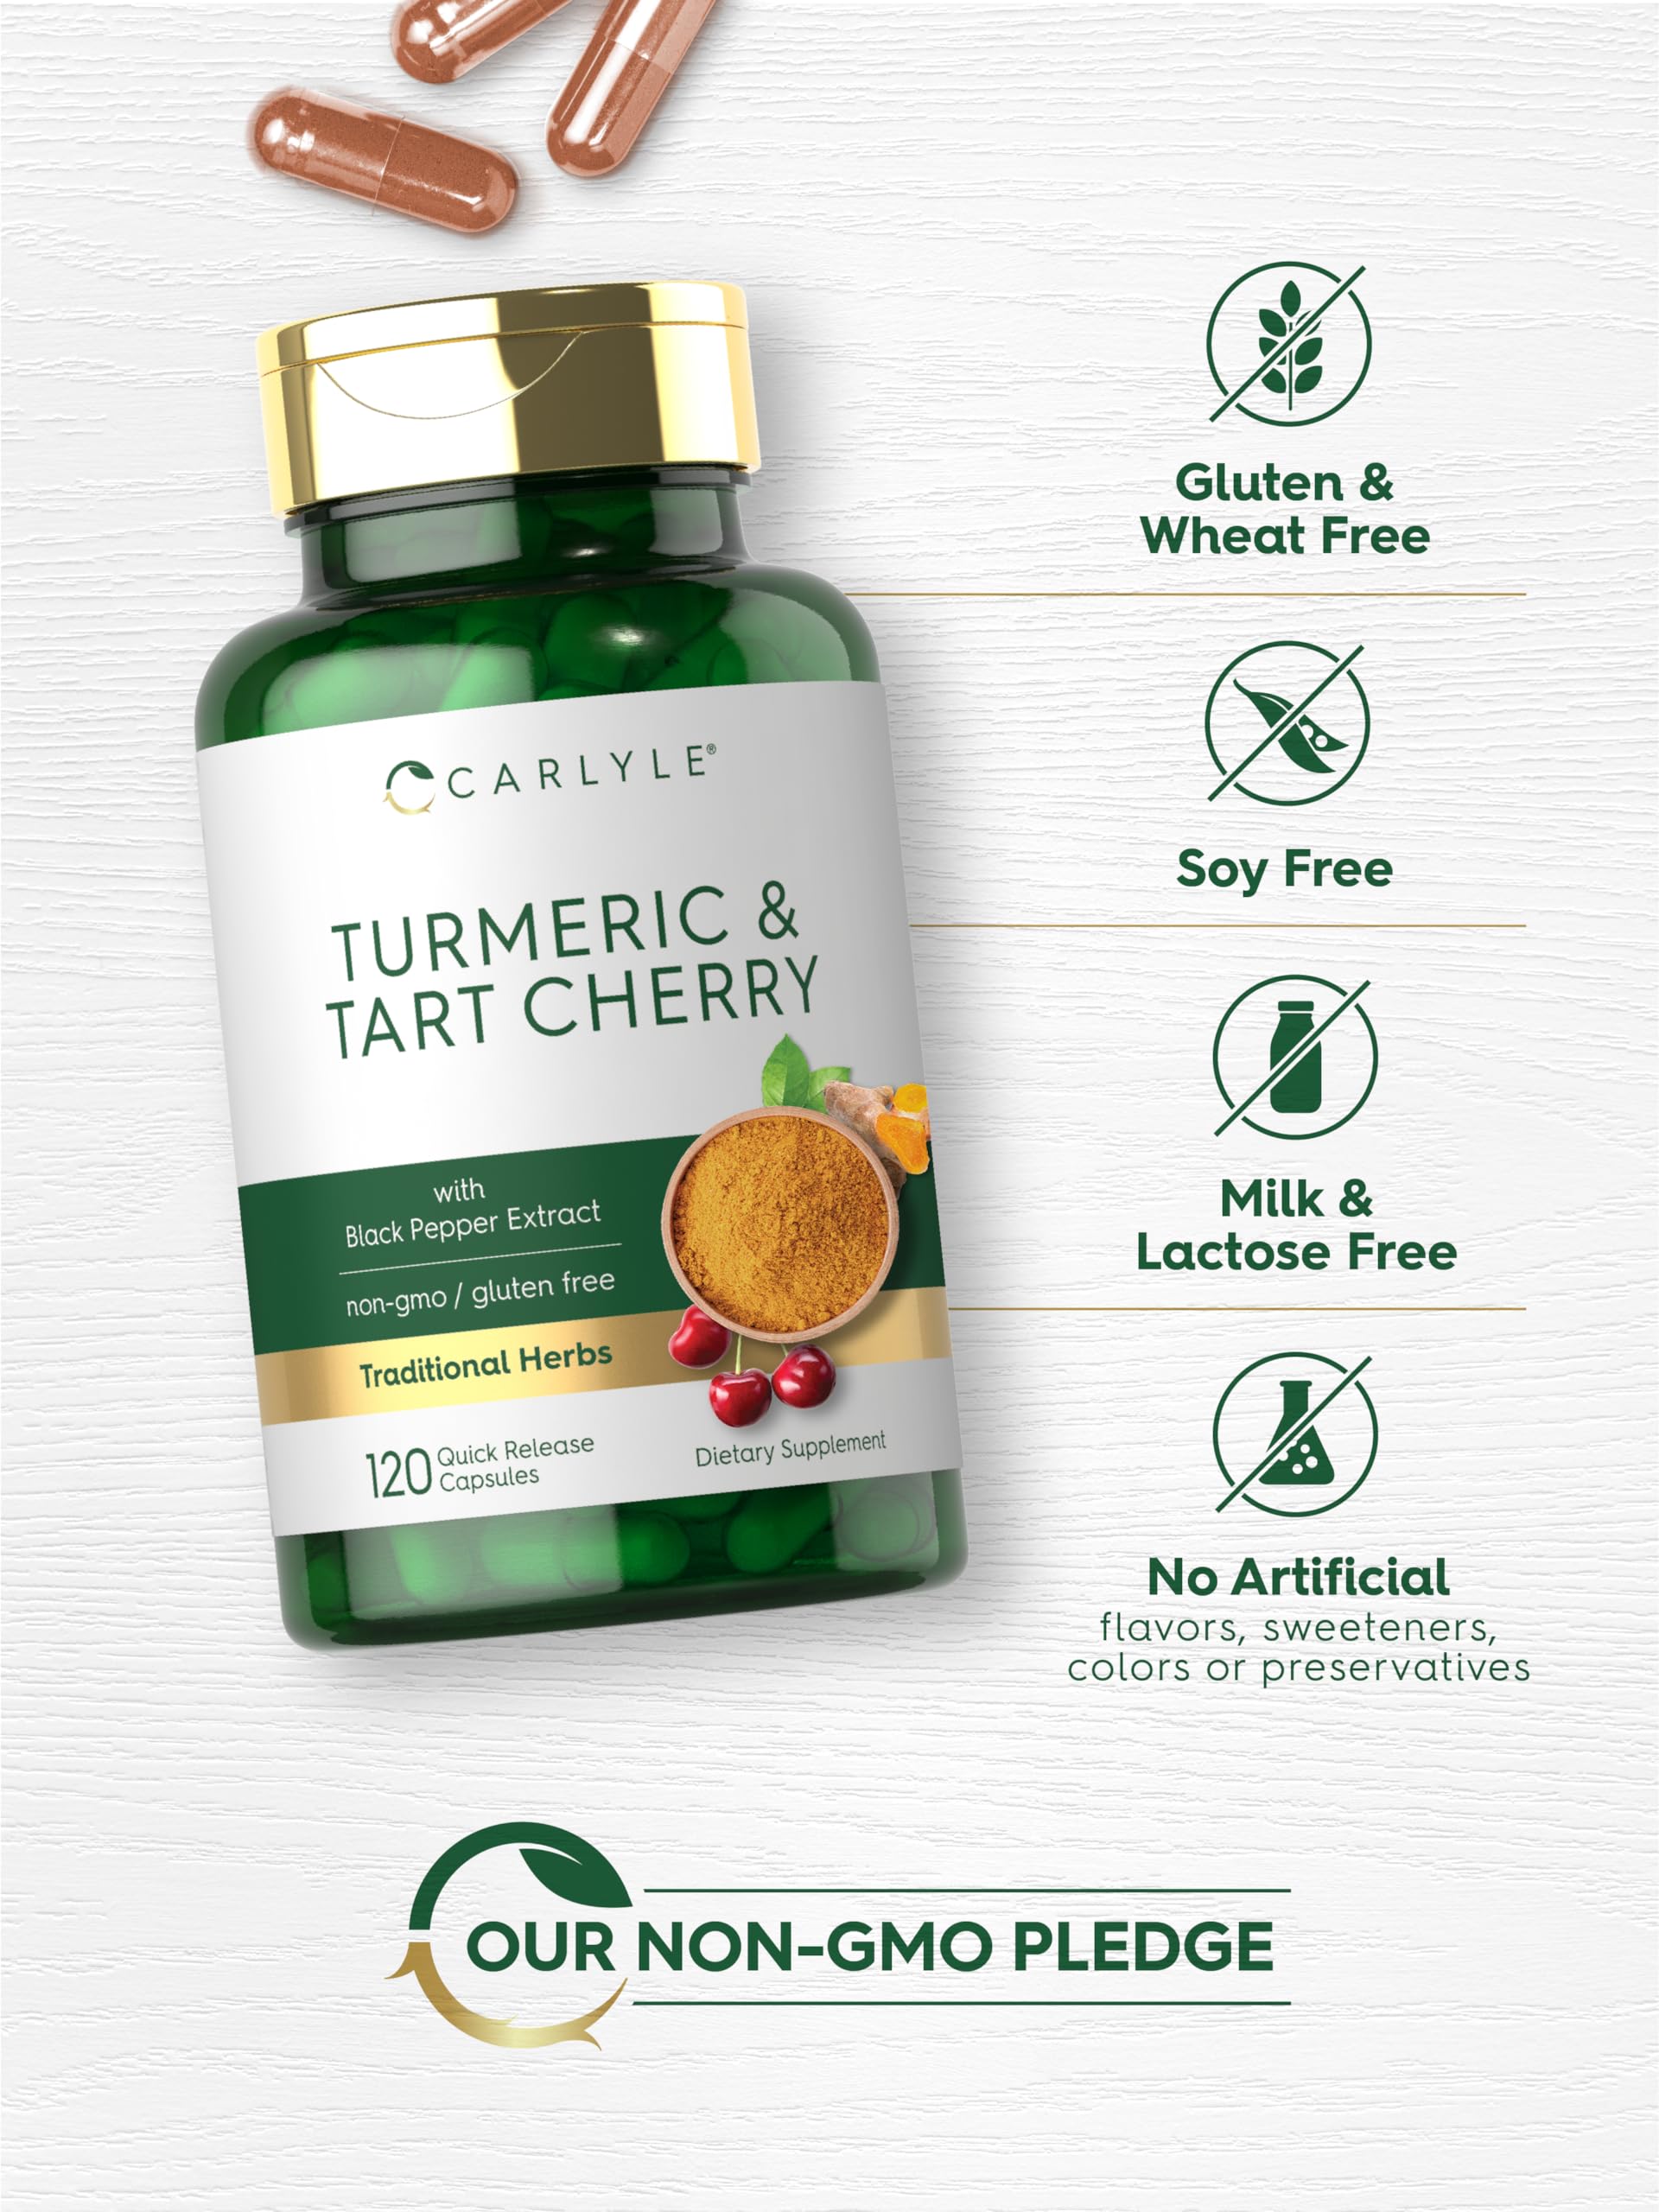 Carlyle Turmeric and Tart Cherry Capsules 120 Count